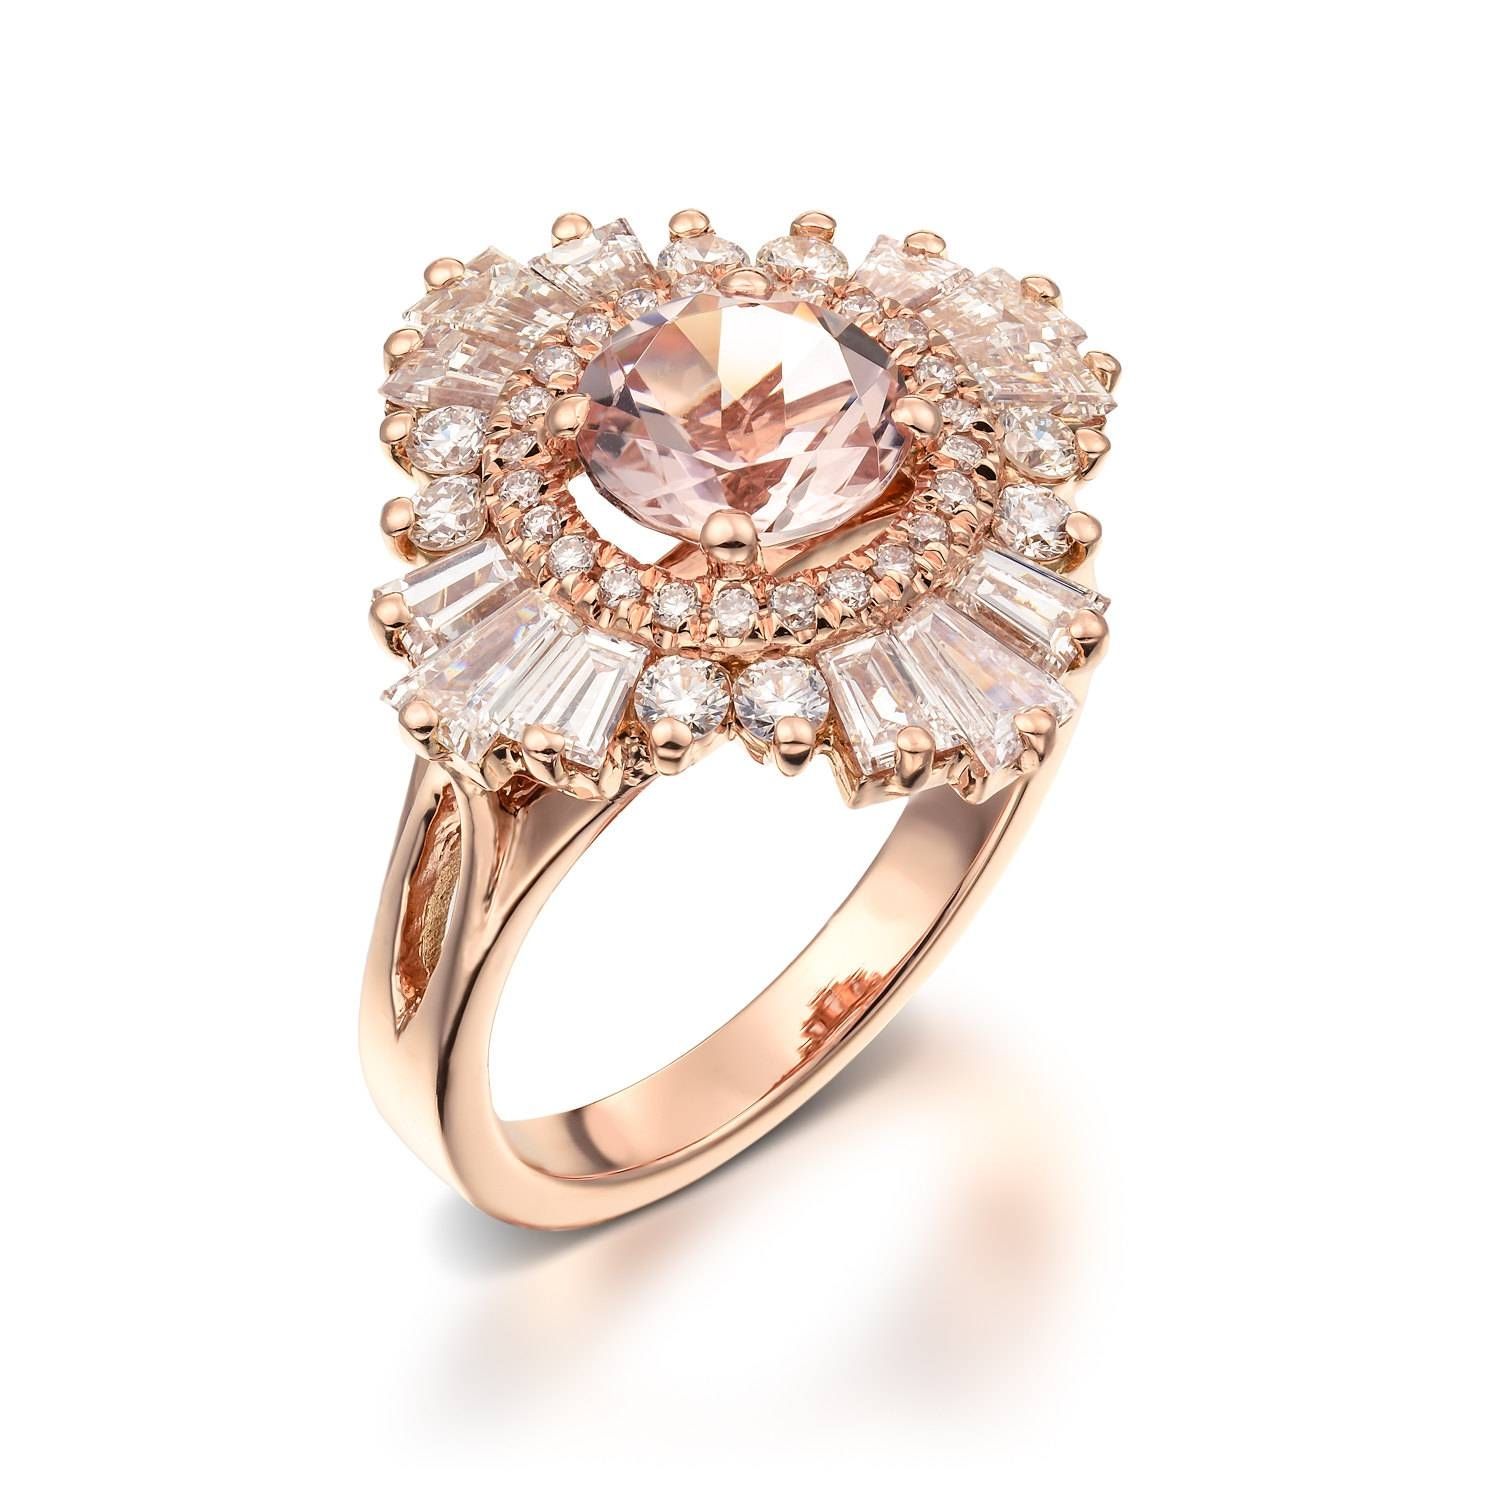 Unique Engagement Ring 18k Rose Gold Diamonds And Morganite Pertaining To Latest First Anniversary Rings (View 10 of 25)